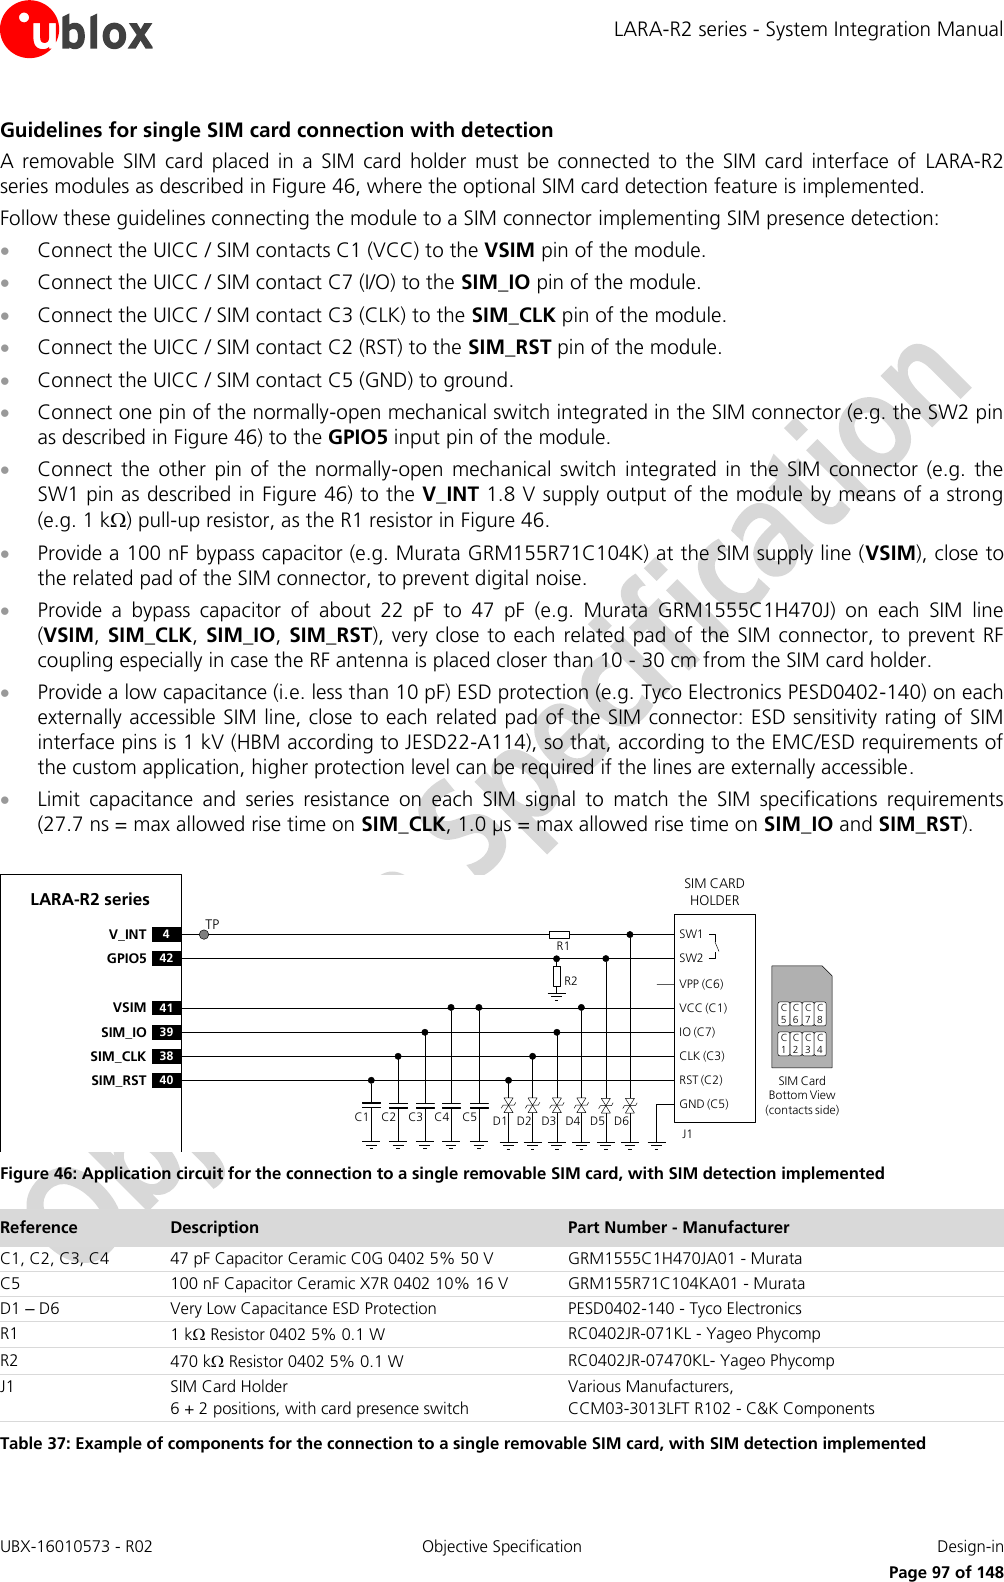 LARA-R2 series - System Integration Manual UBX-16010573 - R02  Objective Specification  Design-in     Page 97 of 148 Guidelines for single SIM card connection with detection A  removable  SIM  card  placed  in  a  SIM  card  holder  must  be  connected  to  the  SIM  card  interface  of  LARA-R2 series modules as described in Figure 46, where the optional SIM card detection feature is implemented. Follow these guidelines connecting the module to a SIM connector implementing SIM presence detection:  Connect the UICC / SIM contacts C1 (VCC) to the VSIM pin of the module.  Connect the UICC / SIM contact C7 (I/O) to the SIM_IO pin of the module.  Connect the UICC / SIM contact C3 (CLK) to the SIM_CLK pin of the module.  Connect the UICC / SIM contact C2 (RST) to the SIM_RST pin of the module.  Connect the UICC / SIM contact C5 (GND) to ground.  Connect one pin of the normally-open mechanical switch integrated in the SIM connector (e.g. the SW2 pin as described in Figure 46) to the GPIO5 input pin of the module.  Connect  the  other  pin  of  the  normally-open  mechanical  switch  integrated  in  the  SIM  connector  (e.g.  the SW1 pin as described in Figure 46) to the V_INT 1.8 V supply output of the module by means of a strong (e.g. 1 k) pull-up resistor, as the R1 resistor in Figure 46.  Provide a 100 nF bypass capacitor (e.g. Murata GRM155R71C104K) at the SIM supply line (VSIM), close to the related pad of the SIM connector, to prevent digital noise.   Provide  a  bypass  capacitor  of  about  22  pF  to  47  pF  (e.g.  Murata  GRM1555C1H470J)  on  each  SIM  line (VSIM, SIM_CLK,  SIM_IO,  SIM_RST), very close to each  related pad of the SIM connector, to prevent RF coupling especially in case the RF antenna is placed closer than 10 - 30 cm from the SIM card holder.  Provide a low capacitance (i.e. less than 10 pF) ESD protection (e.g. Tyco Electronics PESD0402-140) on each externally accessible SIM line, close to each related pad of the SIM connector: ESD sensitivity rating of SIM interface pins is 1 kV (HBM according to JESD22-A114), so that, according to the EMC/ESD requirements of the custom application, higher protection level can be required if the lines are externally accessible.   Limit  capacitance  and  series  resistance  on  each  SIM  signal  to  match  the  SIM  specifications  requirements (27.7 ns = max allowed rise time on SIM_CLK, 1.0 µs = max allowed rise time on SIM_IO and SIM_RST).  LARA-R2 series41VSIM39SIM_IO38SIM_CLK40SIM_RST4V_INT42GPIO5SIM CARD HOLDERC5C6C7C1C2C3SIM Card Bottom View (contacts side)C1VPP (C6)VCC (C1)IO (C7)CLK (C3)RST (C2)GND (C5)C2 C3 C5J1C4SW1SW2D1 D2 D3 D4 D5 D6R2R1C8C4TP Figure 46: Application circuit for the connection to a single removable SIM card, with SIM detection implemented Reference Description Part Number - Manufacturer C1, C2, C3, C4 47 pF Capacitor Ceramic C0G 0402 5% 50 V GRM1555C1H470JA01 - Murata C5 100 nF Capacitor Ceramic X7R 0402 10% 16 V GRM155R71C104KA01 - Murata D1 – D6 Very Low Capacitance ESD Protection PESD0402-140 - Tyco Electronics  R1 1 k Resistor 0402 5% 0.1 W RC0402JR-071KL - Yageo Phycomp R2 470 k Resistor 0402 5% 0.1 W RC0402JR-07470KL- Yageo Phycomp J1 SIM Card Holder 6 + 2 positions, with card presence switch Various Manufacturers, CCM03-3013LFT R102 - C&amp;K Components Table 37: Example of components for the connection to a single removable SIM card, with SIM detection implemented  